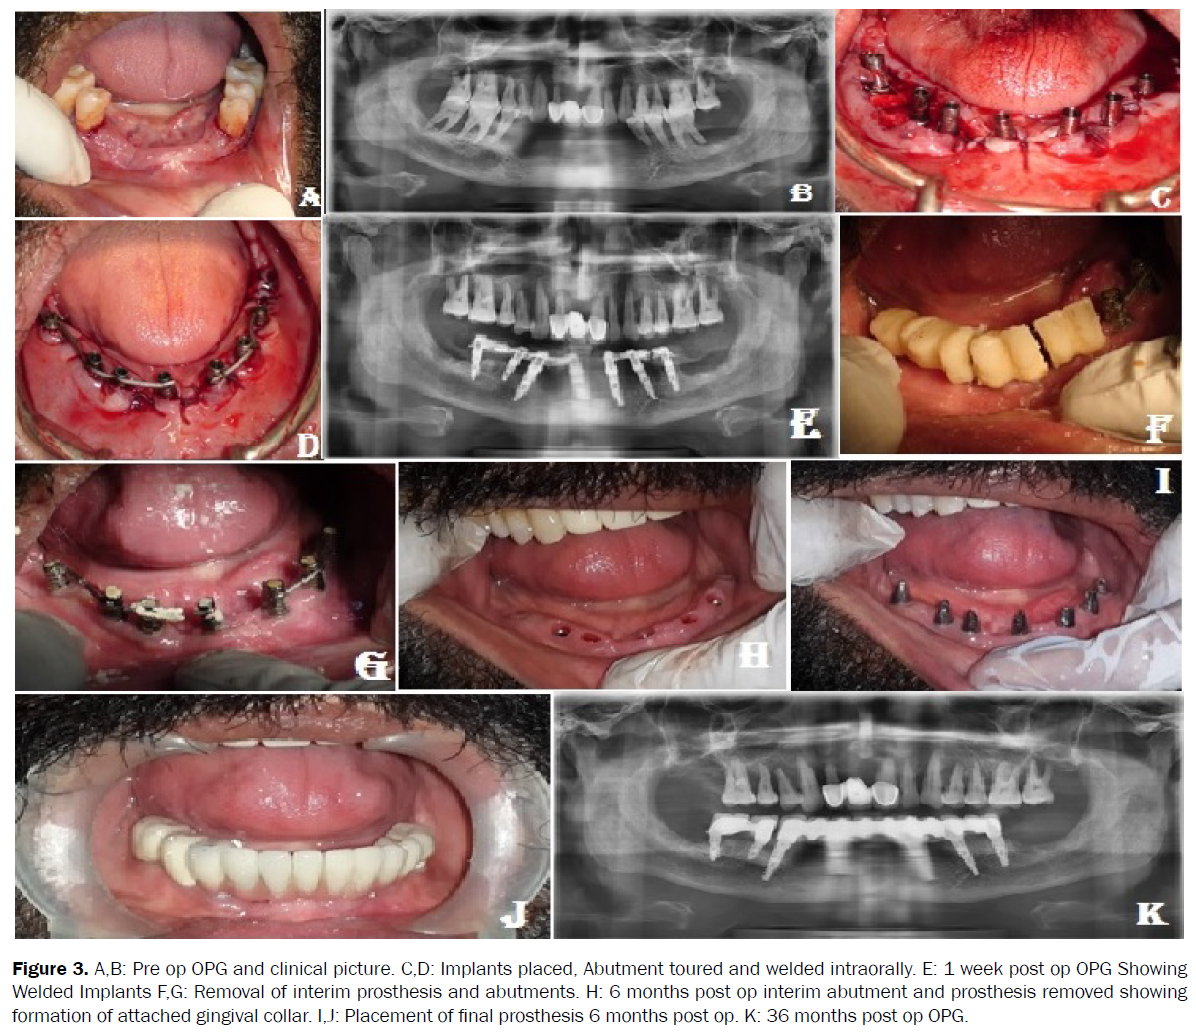 dental-sciences-pre-op-opg-clinical-picture